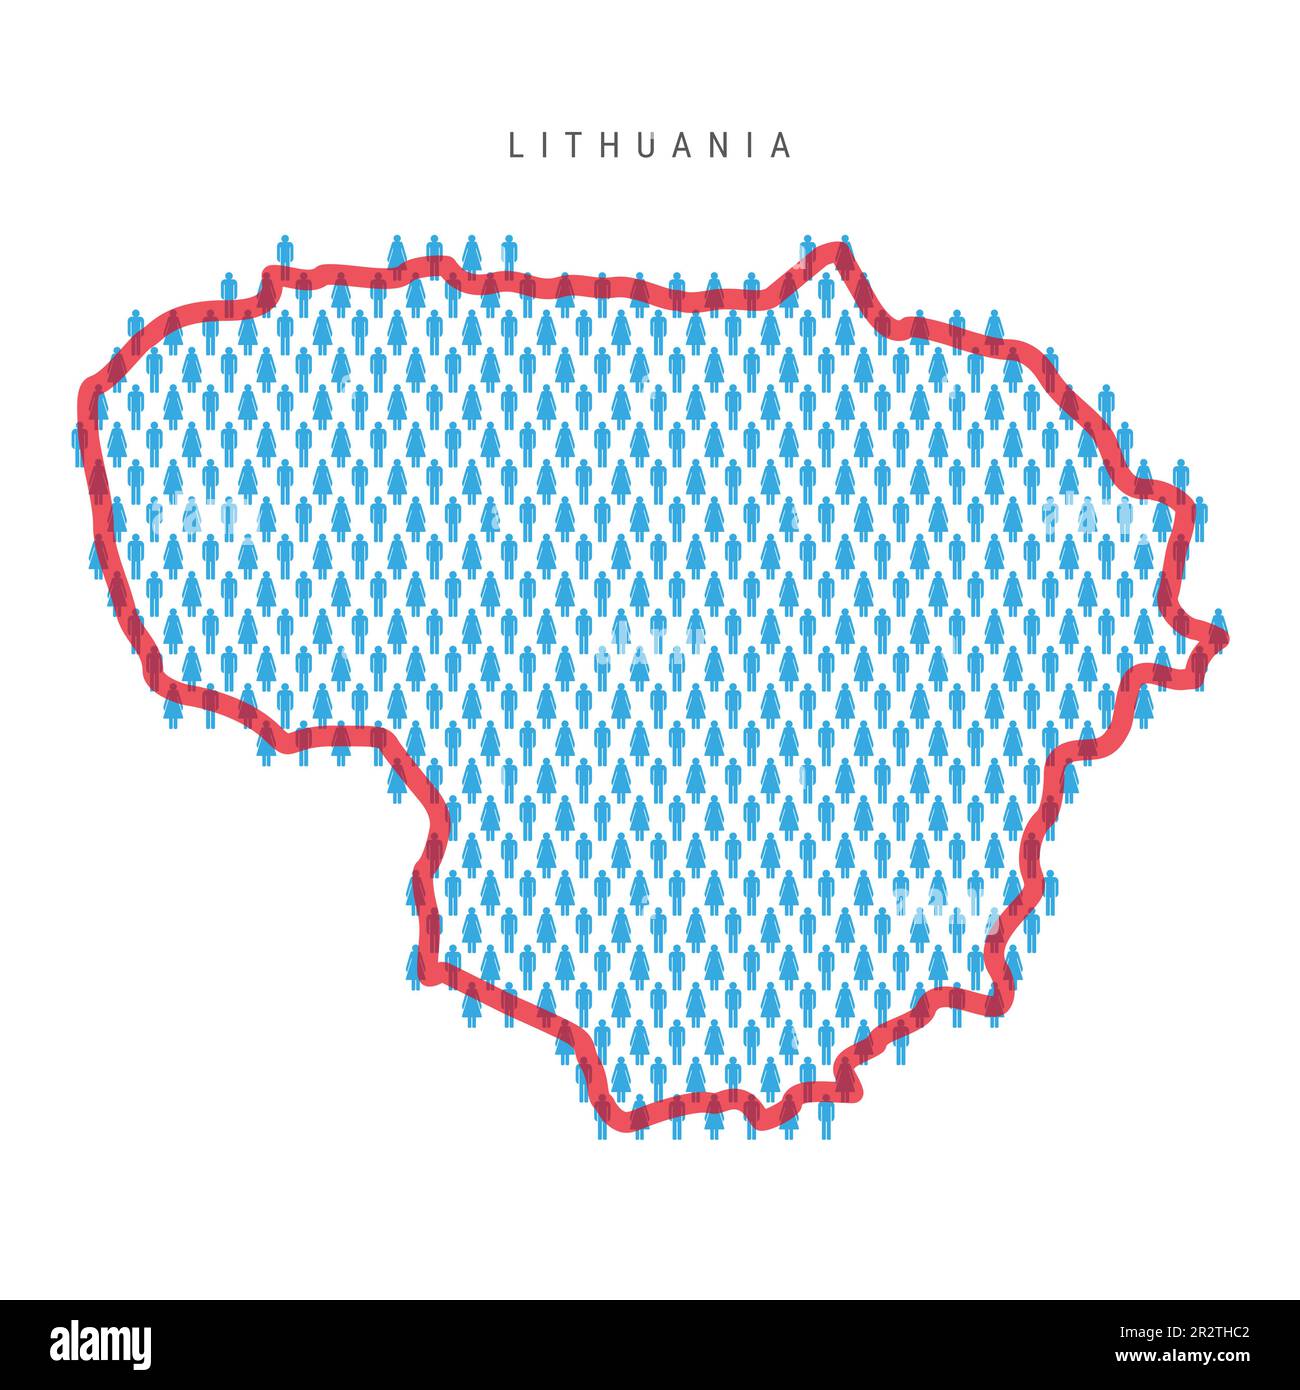 Lithuania population map. Stick figures Lithuanian people map with bold red translucent country border. Pattern of men and women icons. Isolated vecto Stock Vector